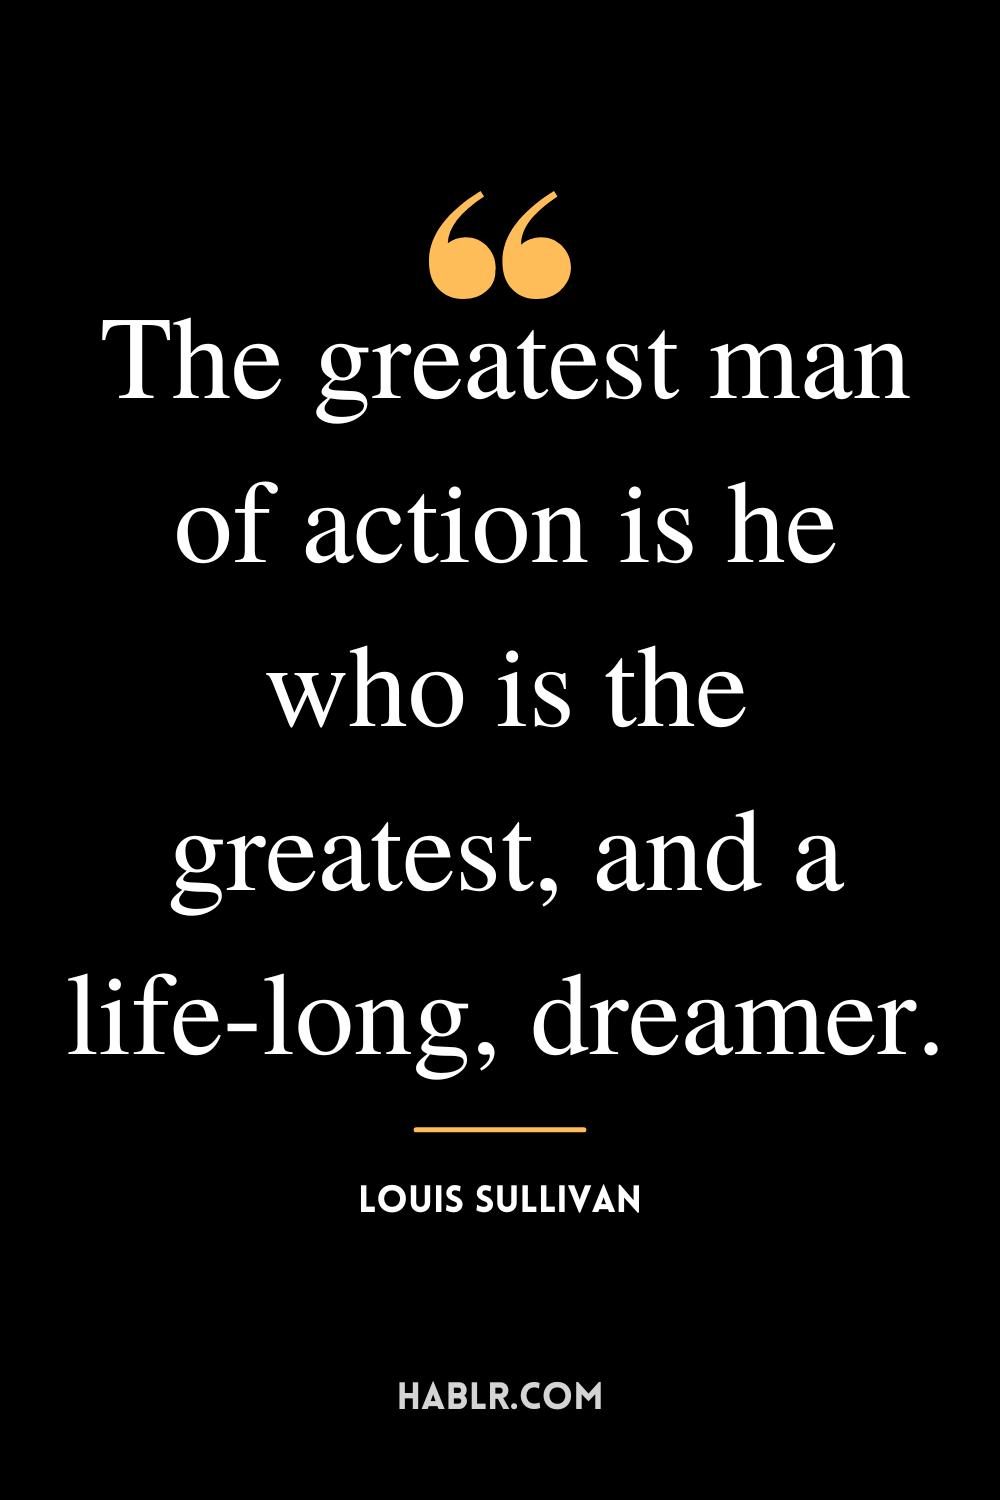 “The greatest man of action is he who is the greatest, and a life-long, dreamer.” -Louis Sullivan